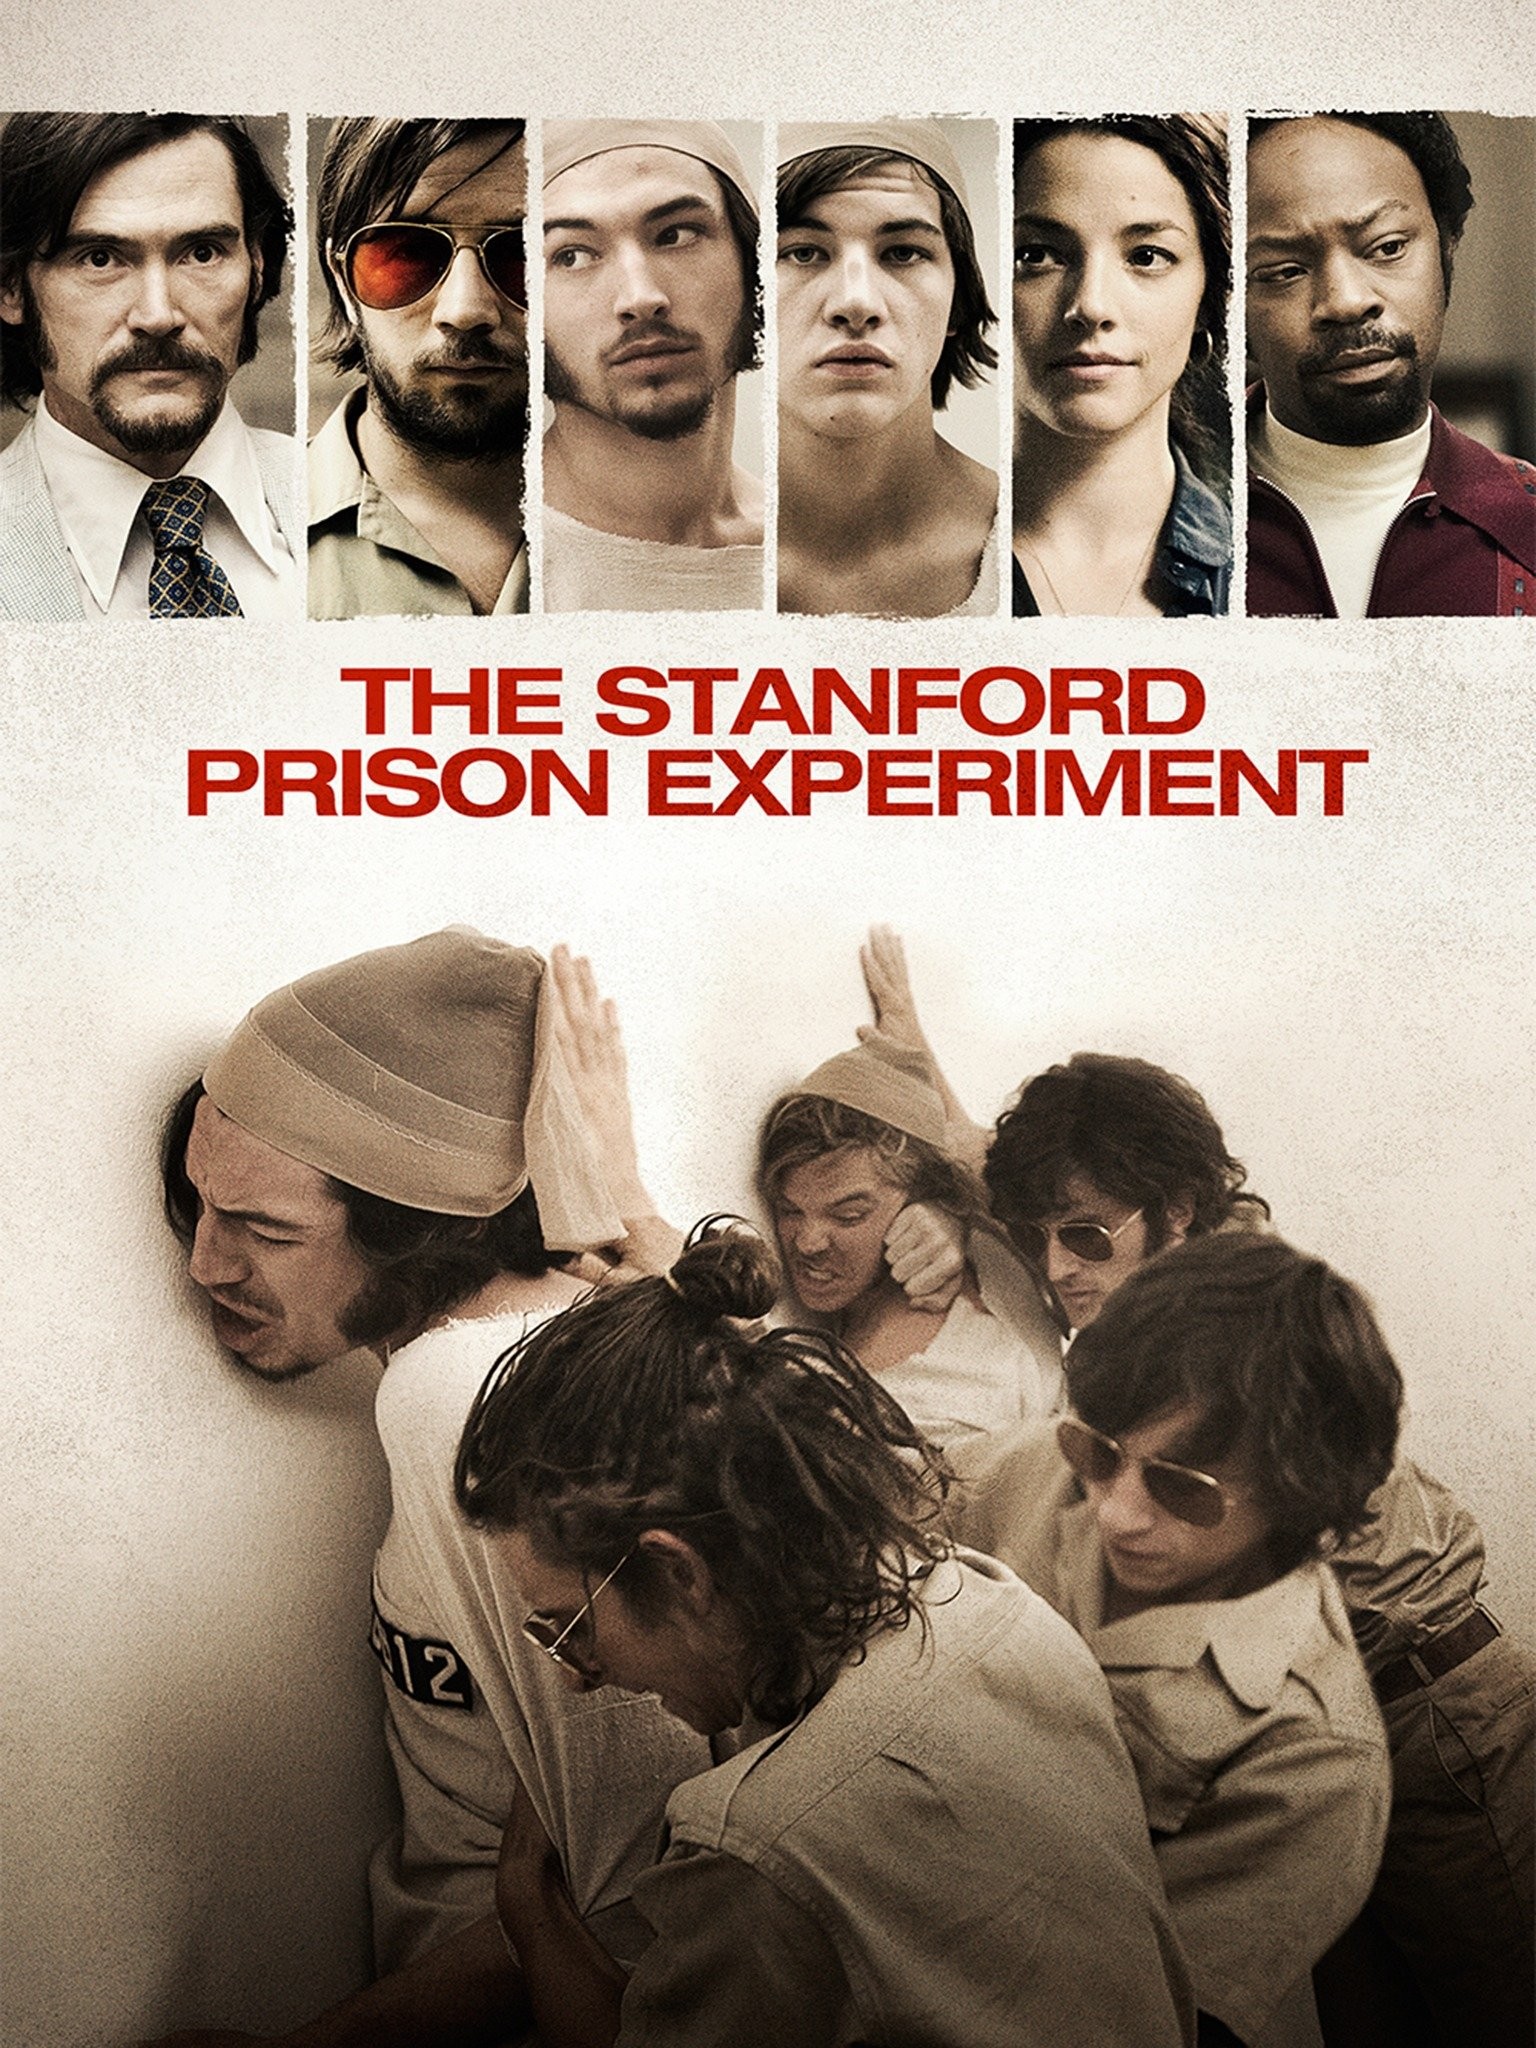 The stanford prison experiment	